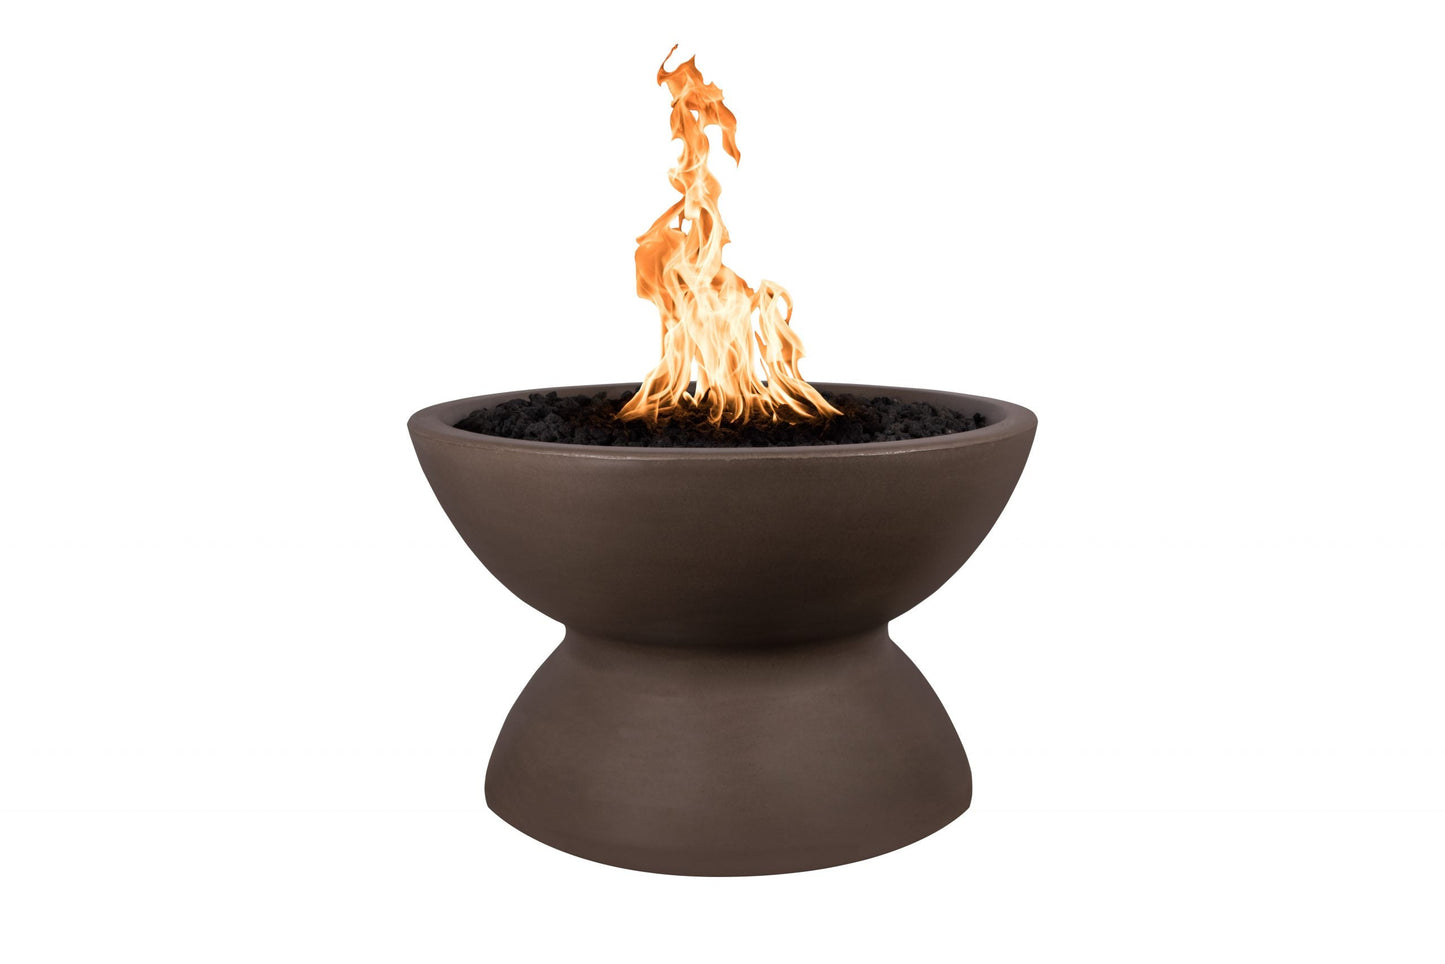 The Outdoor Plus Round Copa 33" Metallic Copper GFRC Concrete Natural Gas Fire Pit with Match Lit Ignition